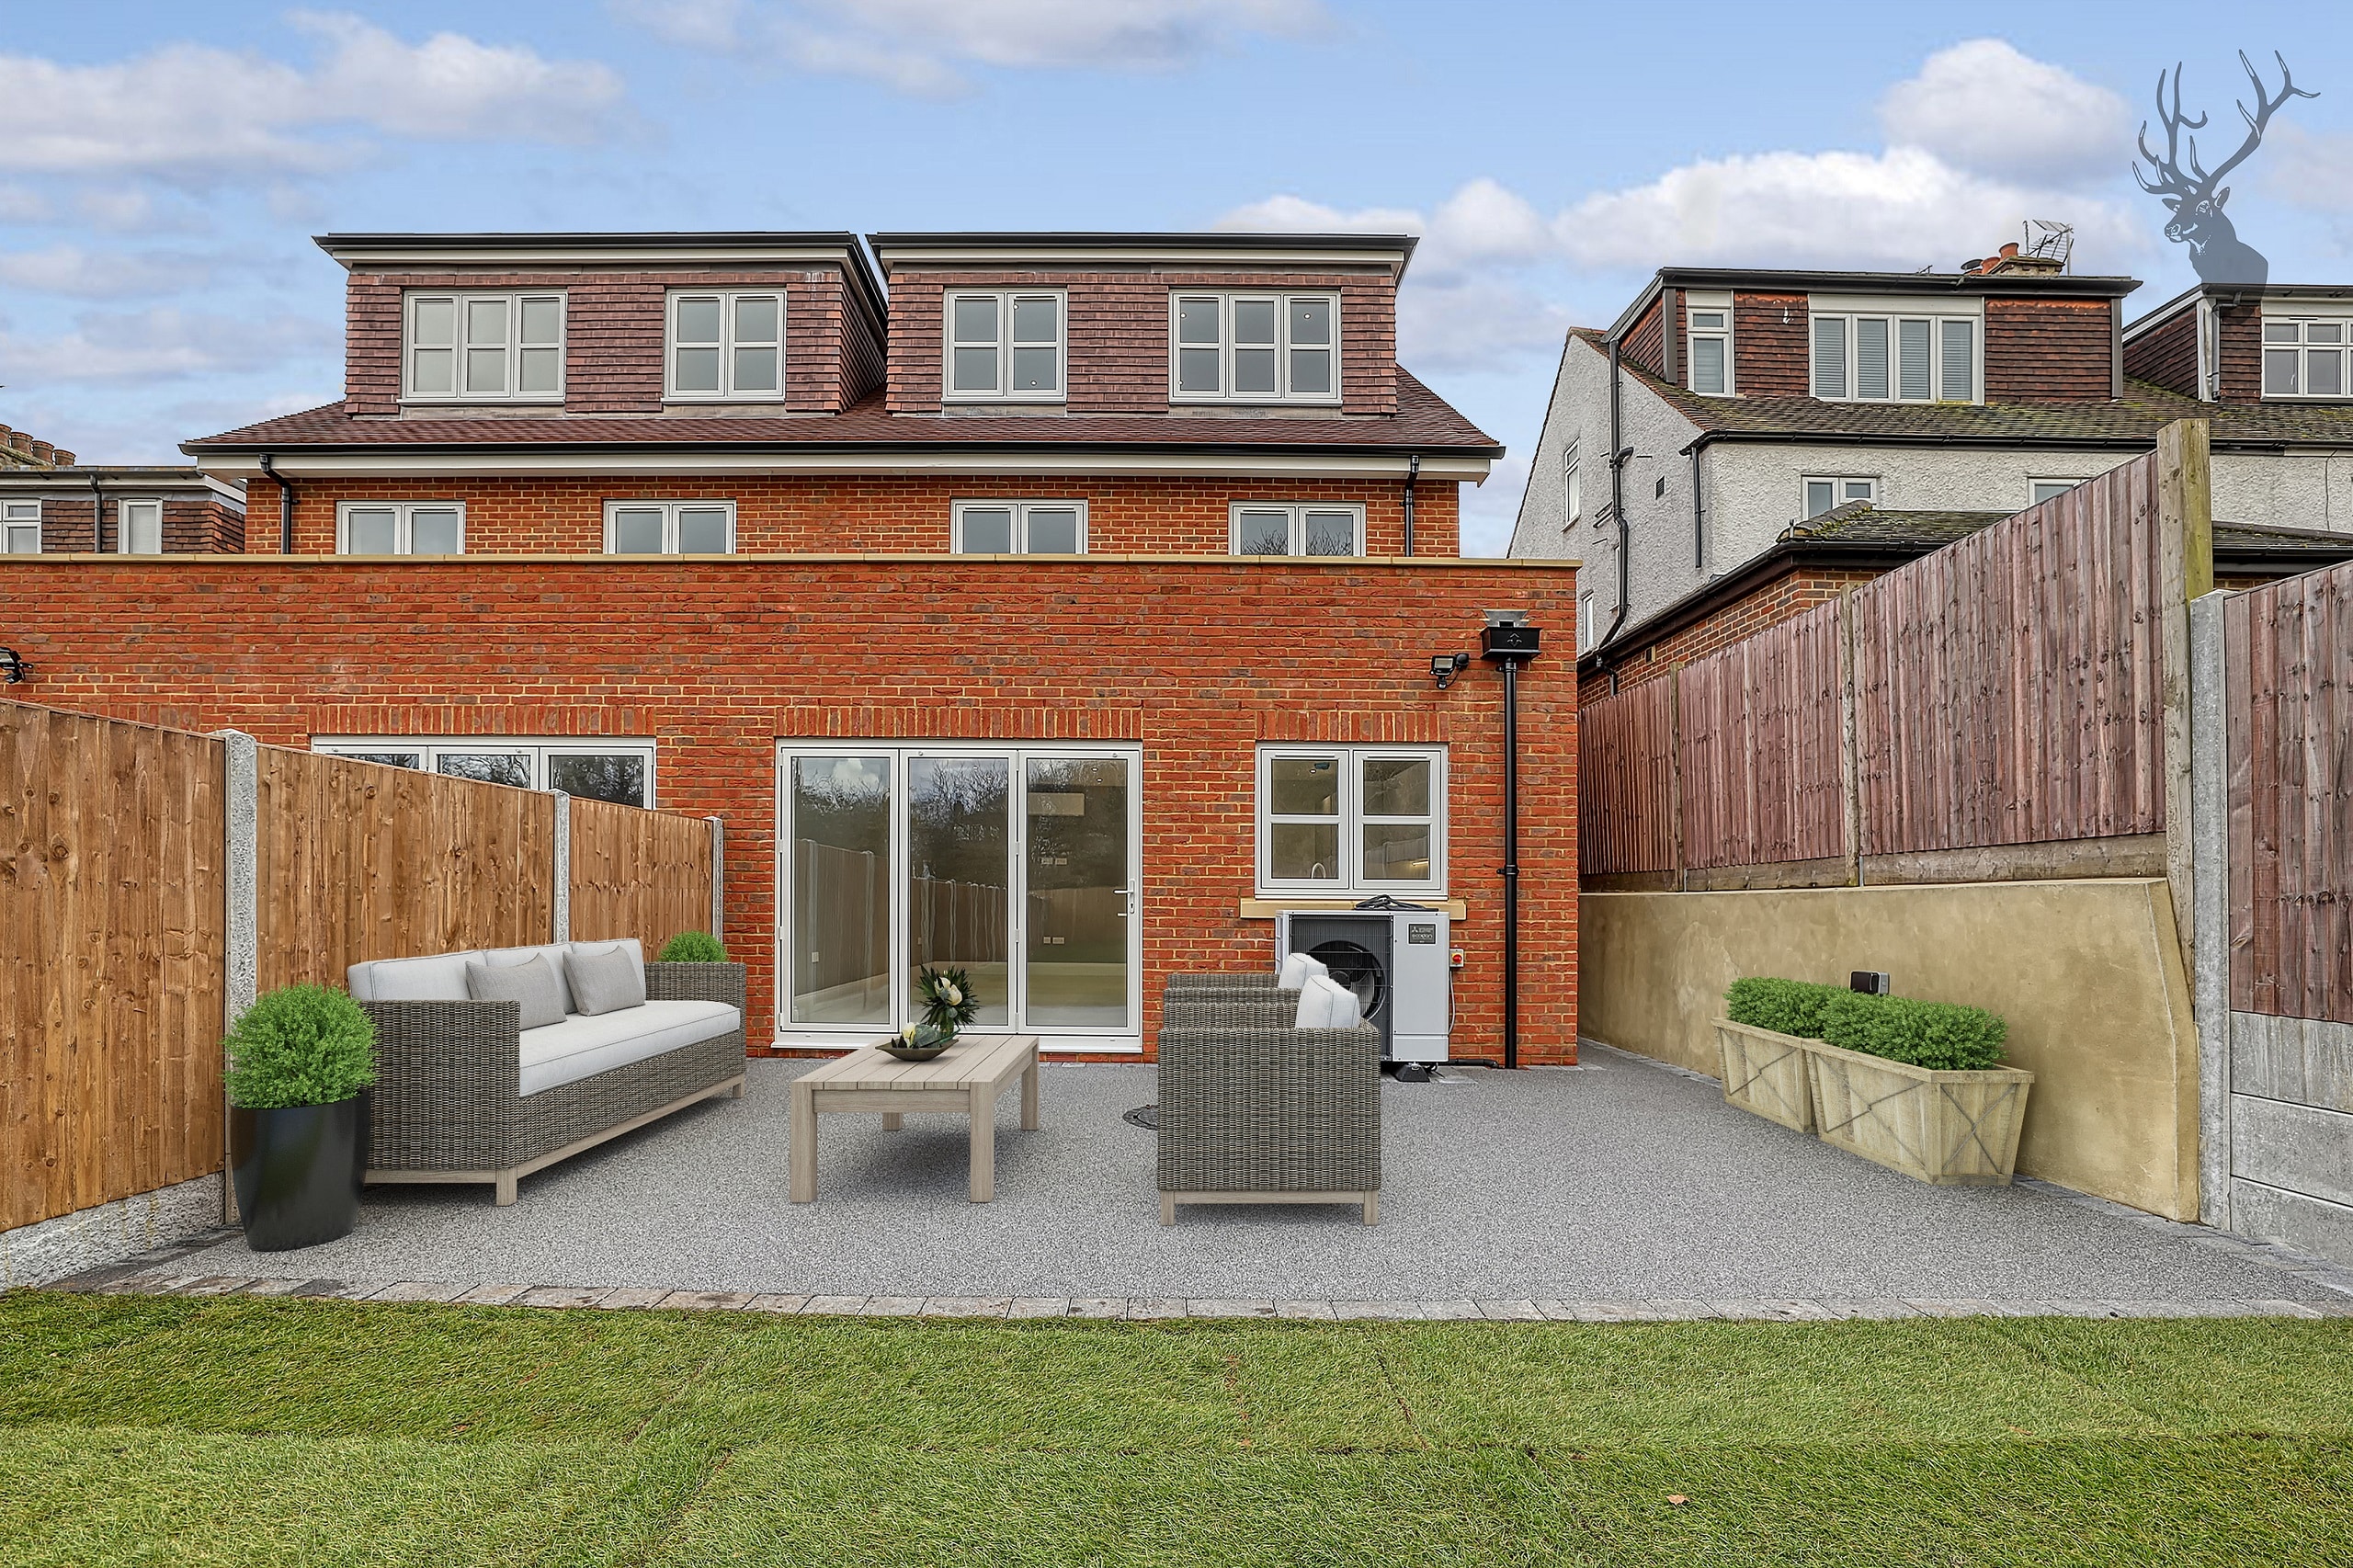 patio in garden at Chingford semi-detached property development project